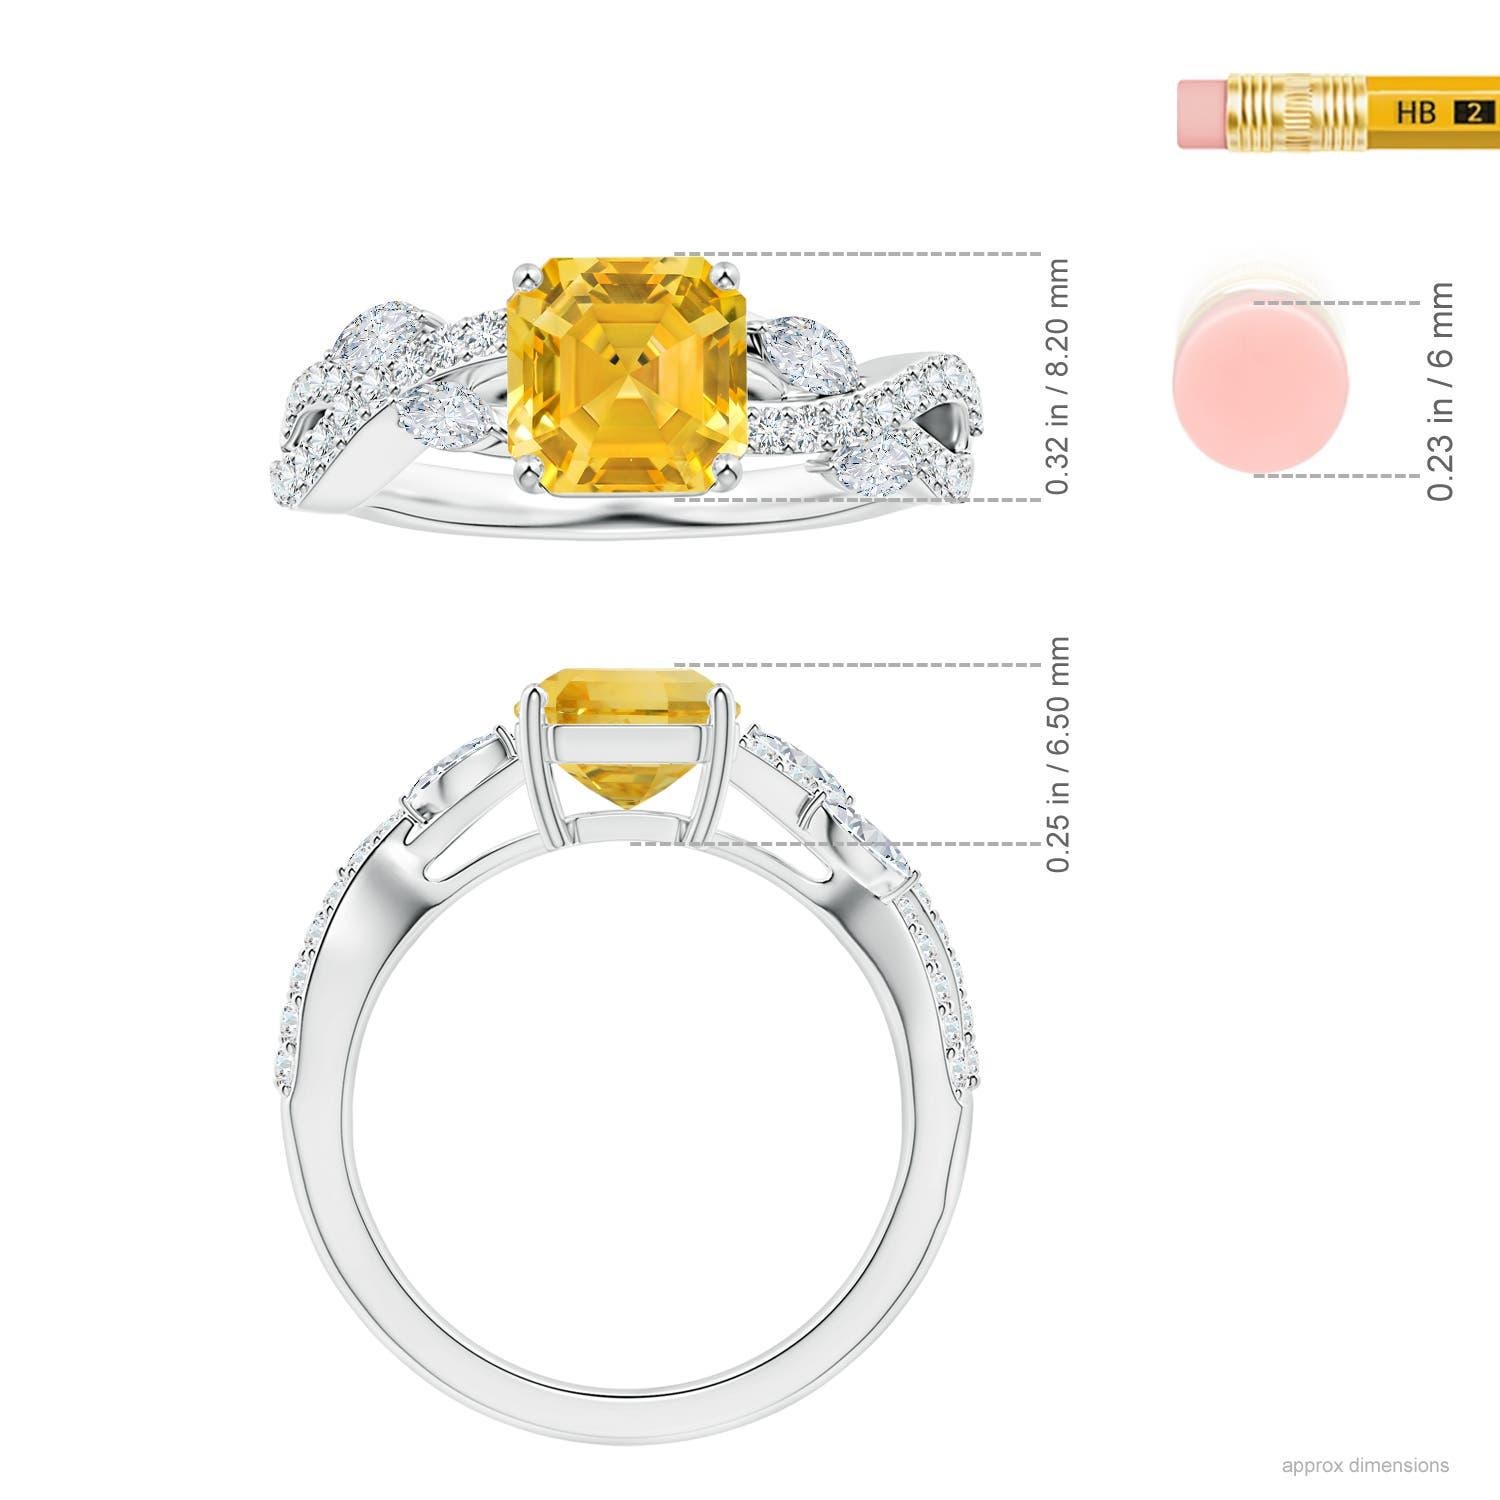 For Sale:  Angara Gia Certified Emerald-Cut Yellow Sapphire Diamond Ring in White Gold 5